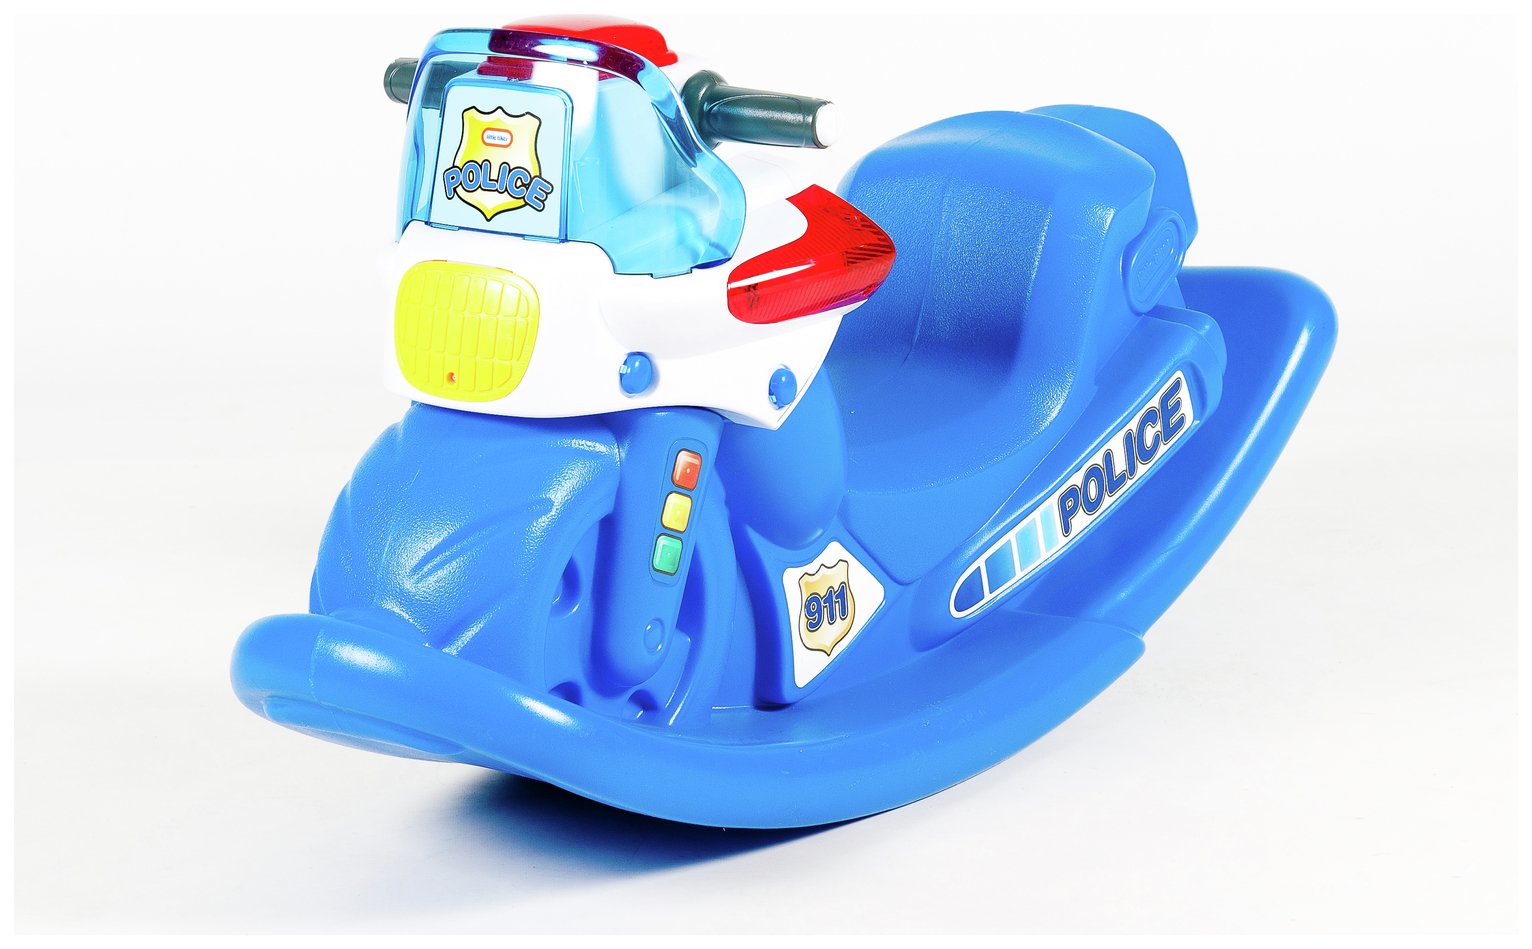 Little Tikes Police Cycle Rocker review